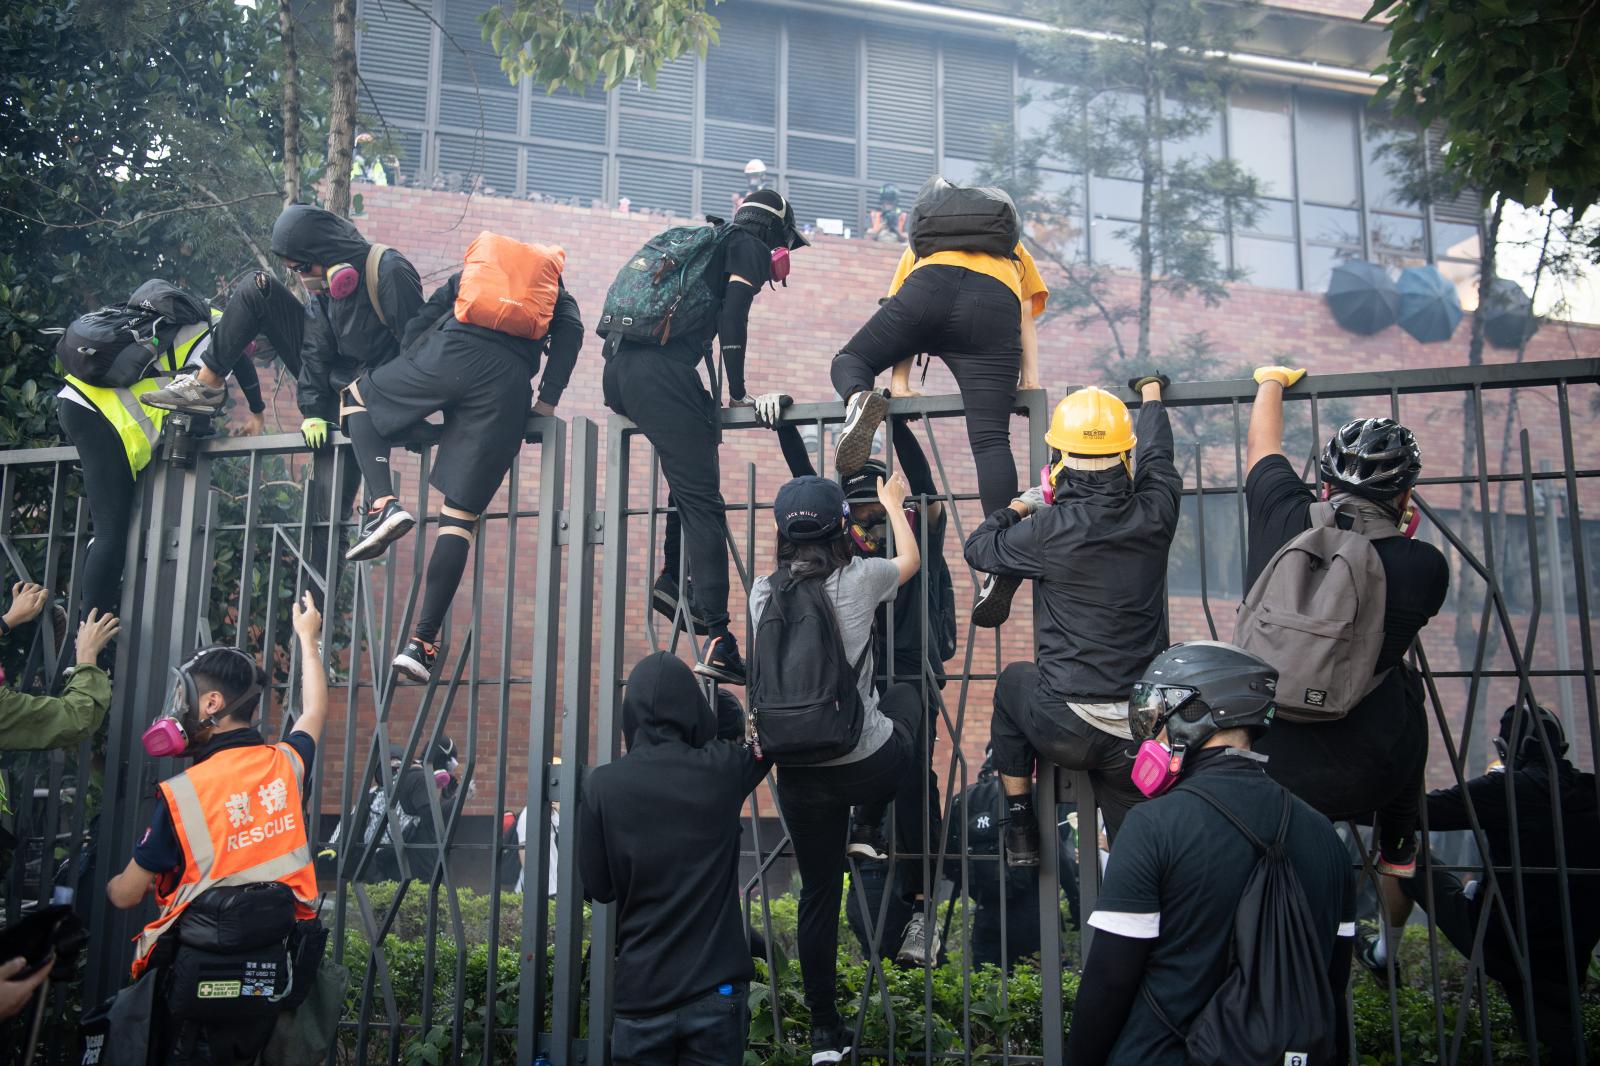 HONG KONG, CHINA - NOVEMBER 18: Anti-government protesters flee after clashing with police at Hong Kong Polytechnic University on November 18, 2019 in Hong Kong, China. Anti-government protesters organized a general strike since Monday as demonstrations in Hong Kong stretched into its sixth month with demands for an independent inquiry into police brutality, the retraction of the word "riot" to describe the rallies, and genuine universal suffrage. (Photo by Laurel Chor/Getty Images)